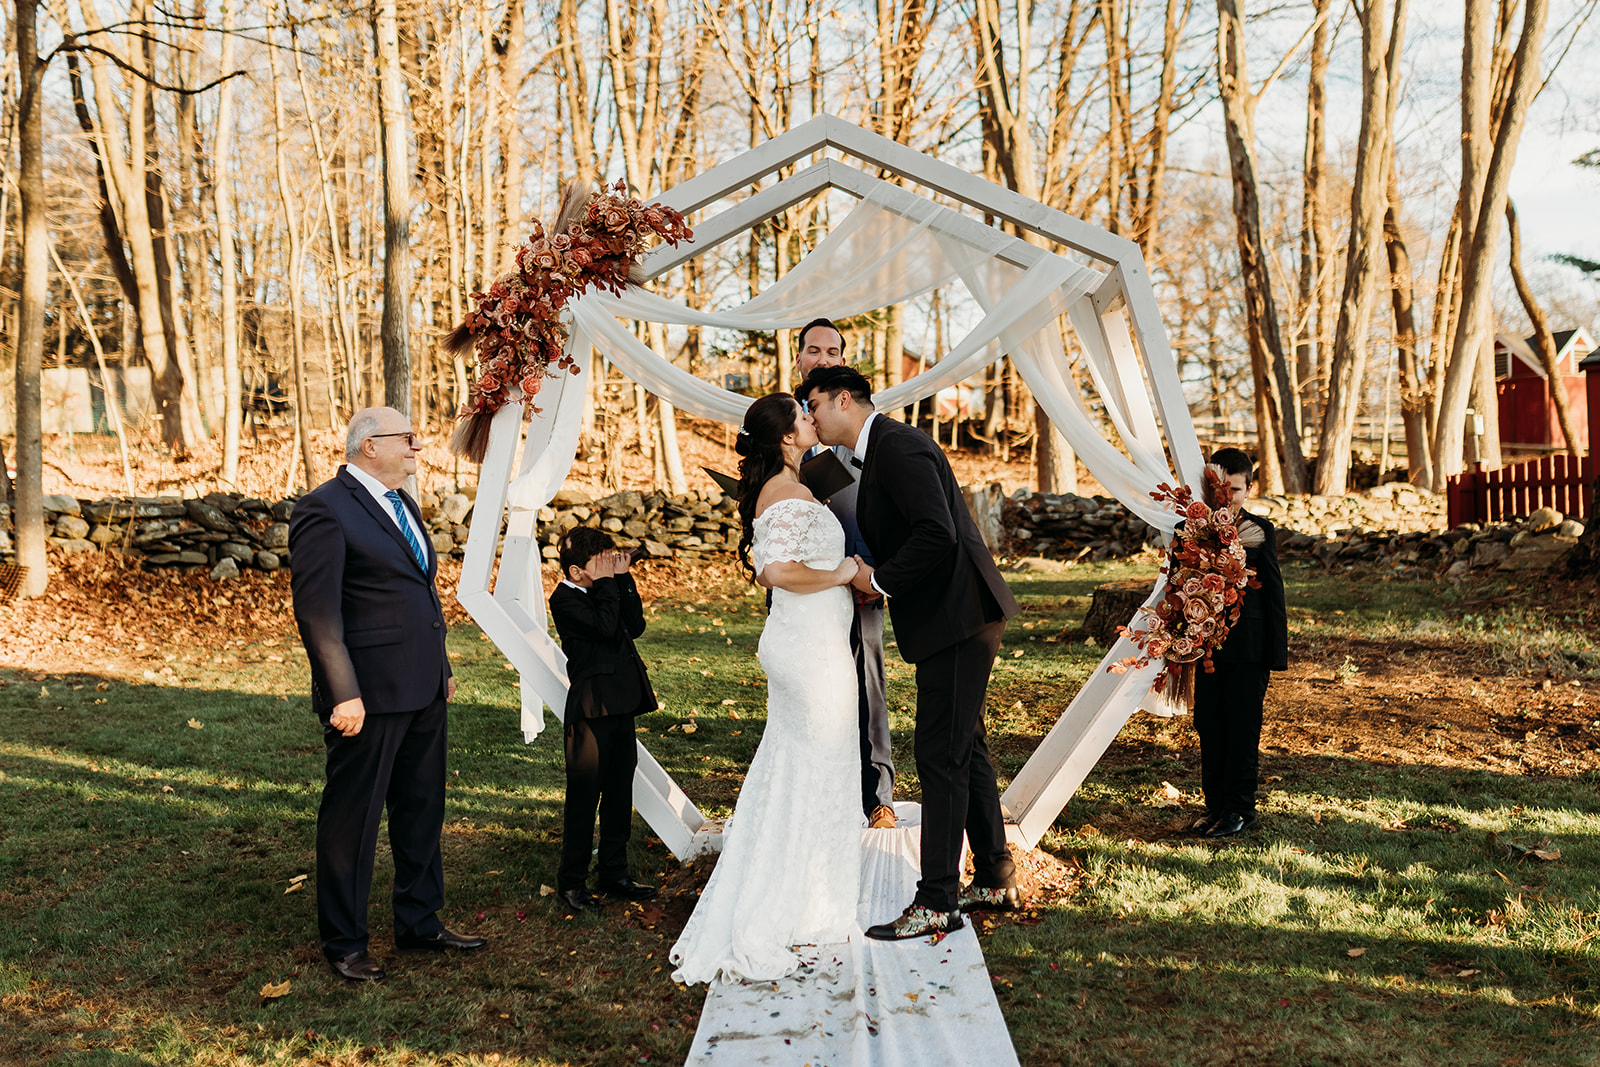 Emotional embrace between the bride and groom, surrounded by the beauty of their Connecticut wedding day